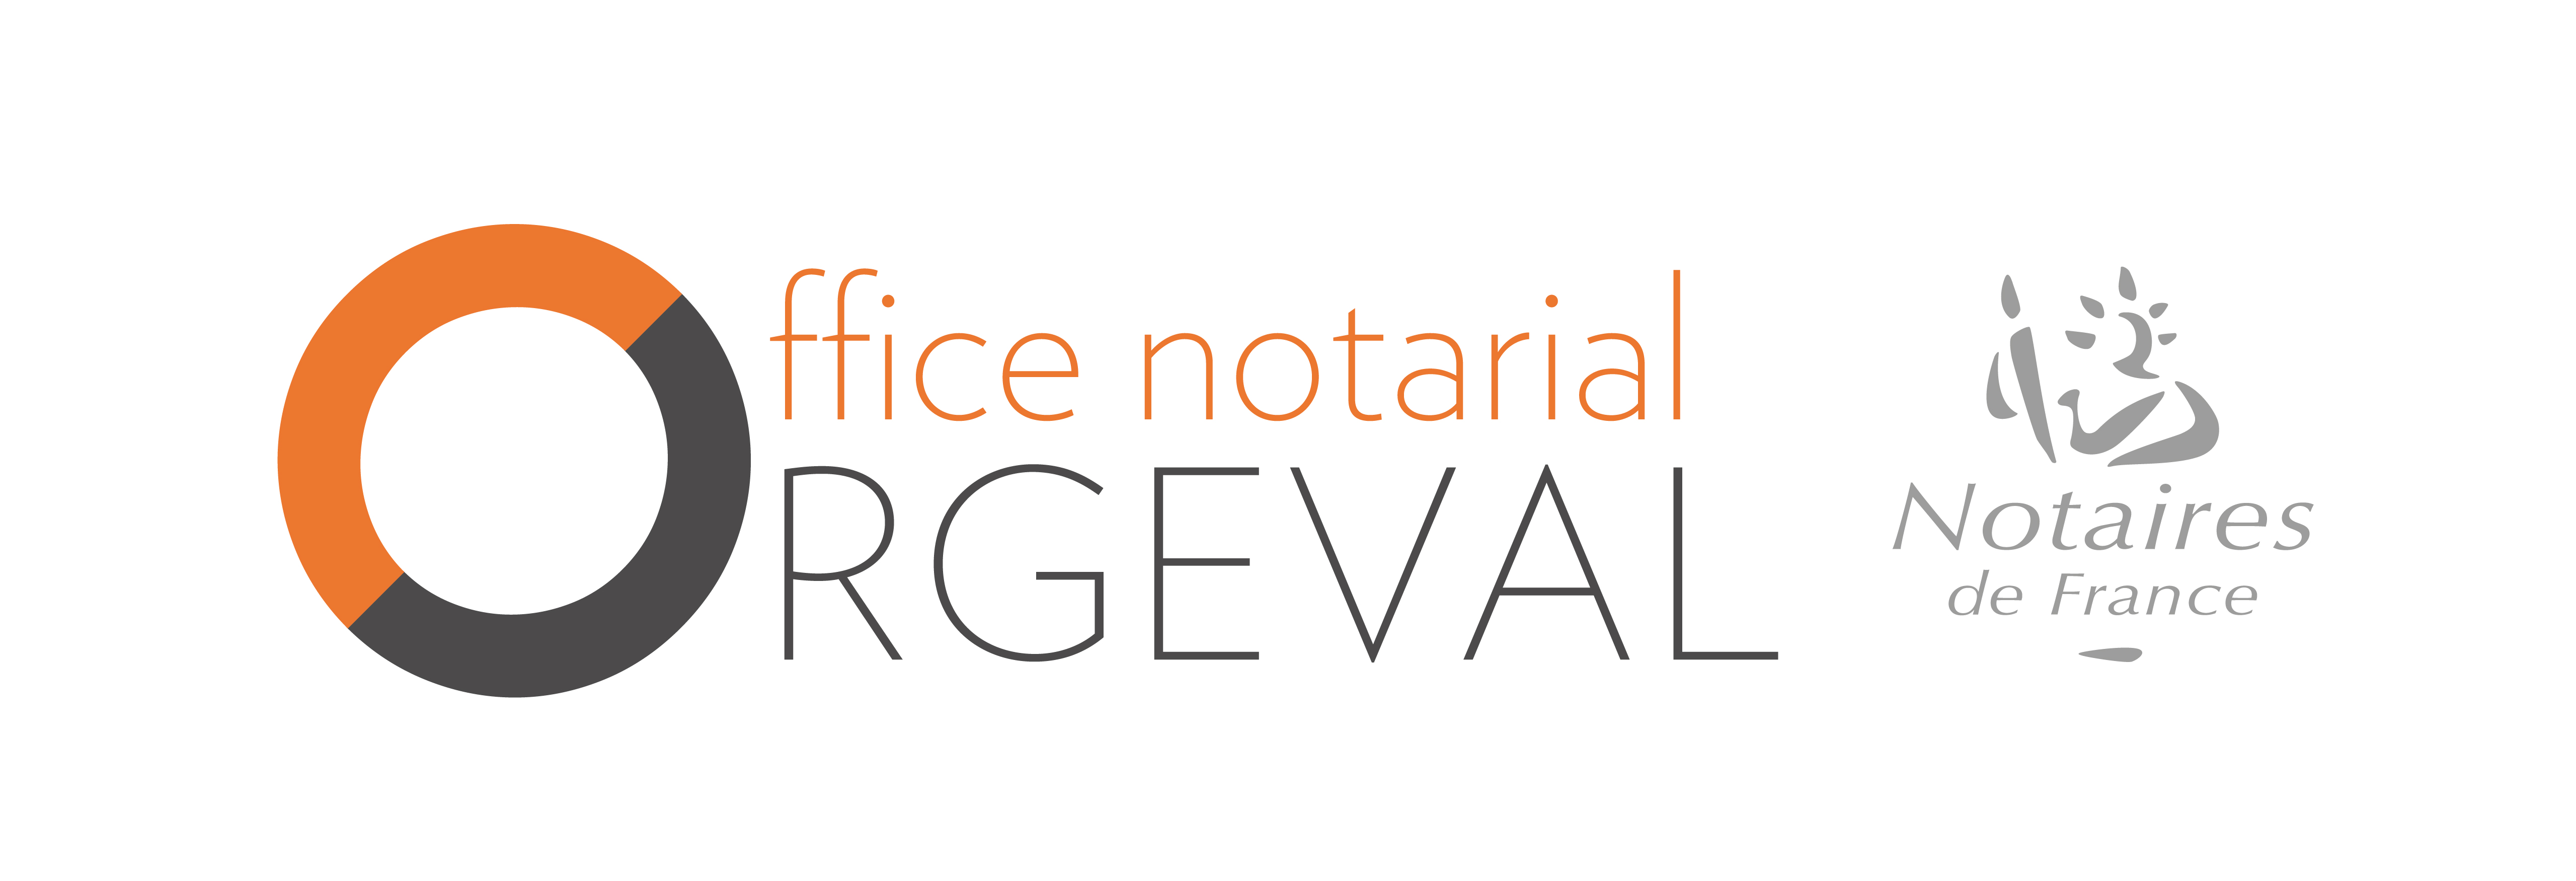 OFFICE NOTARIAL D'ORGEVAL